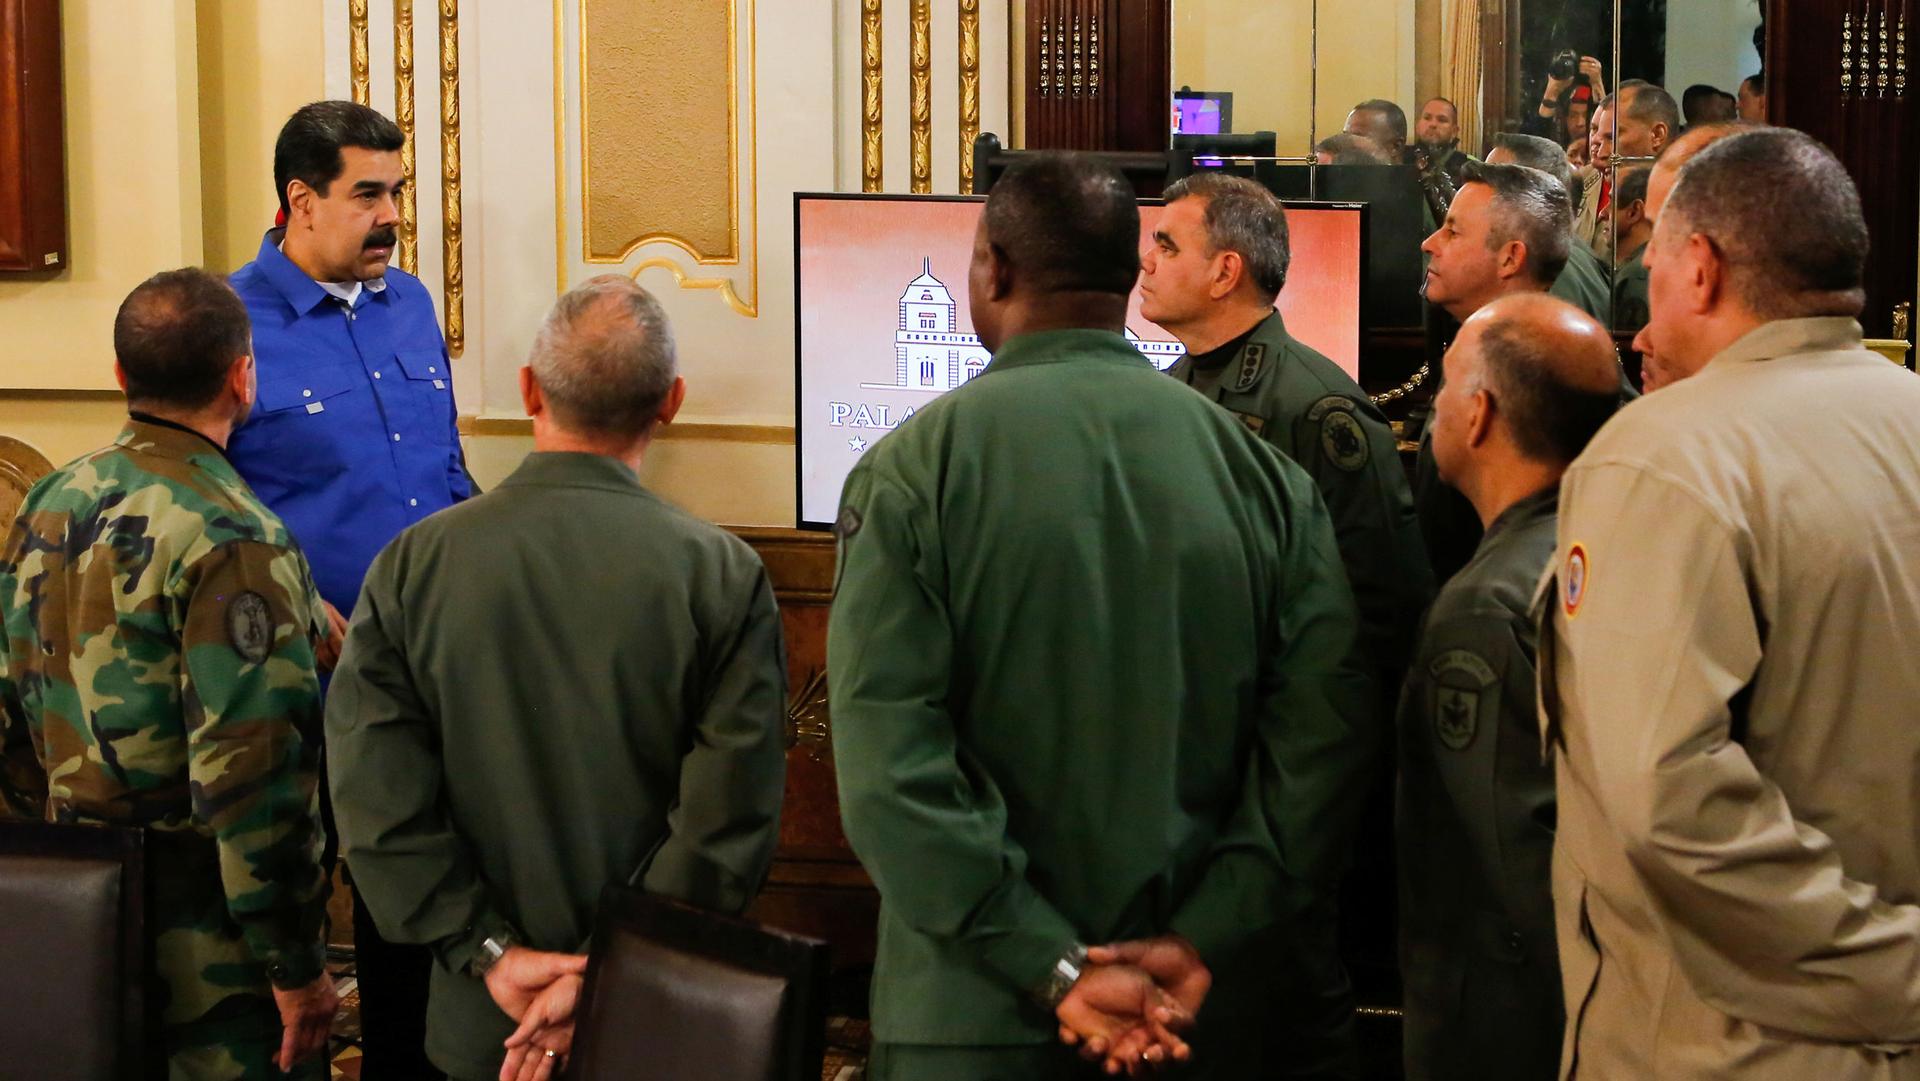 Venezuela's President Nicolás Maduro is shown wearing a blue shirt standing among a group of military authorities.